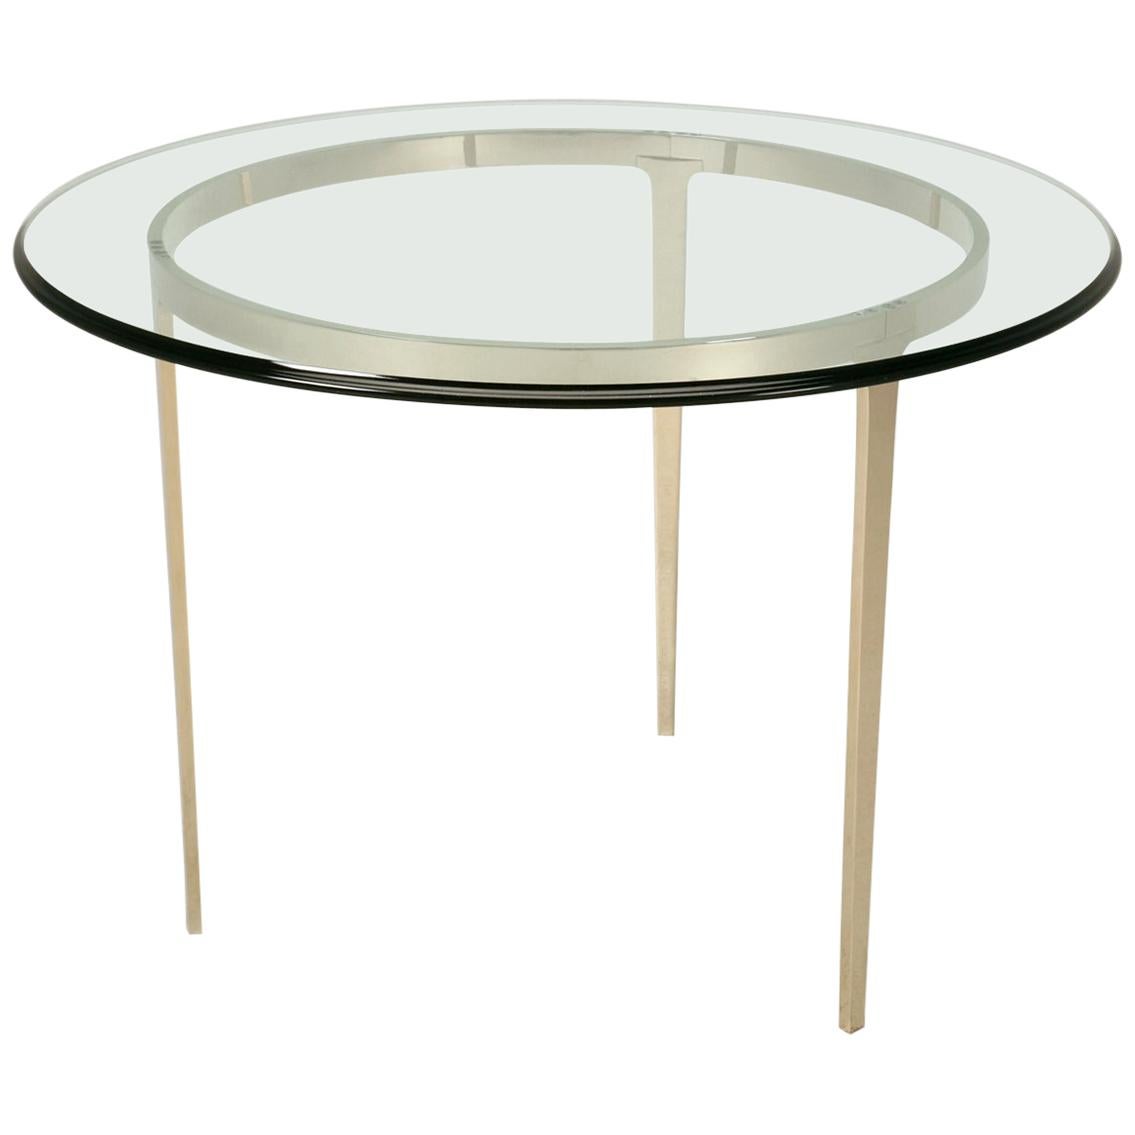 Custom Handmade Round Center Hall Table in Solid Bronze Available in Most Sizes For Sale